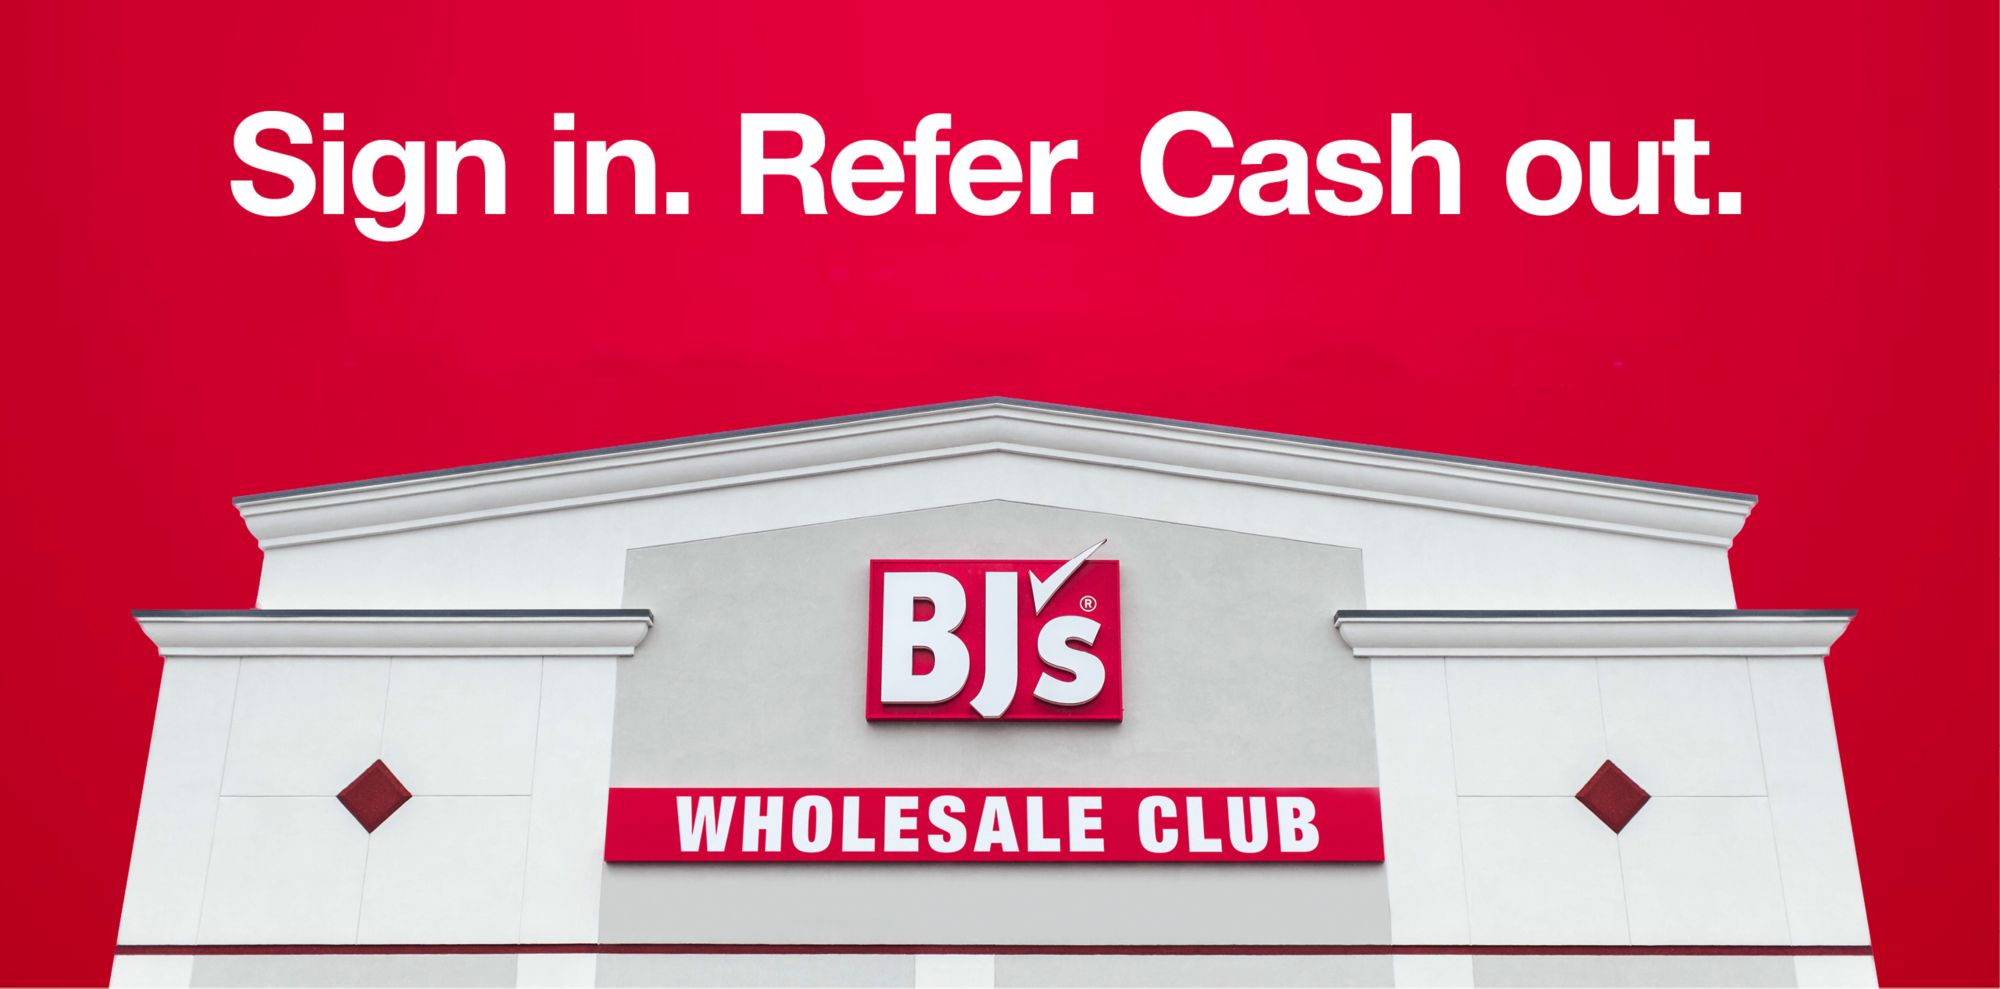 Sign in. Refer. Cash out.